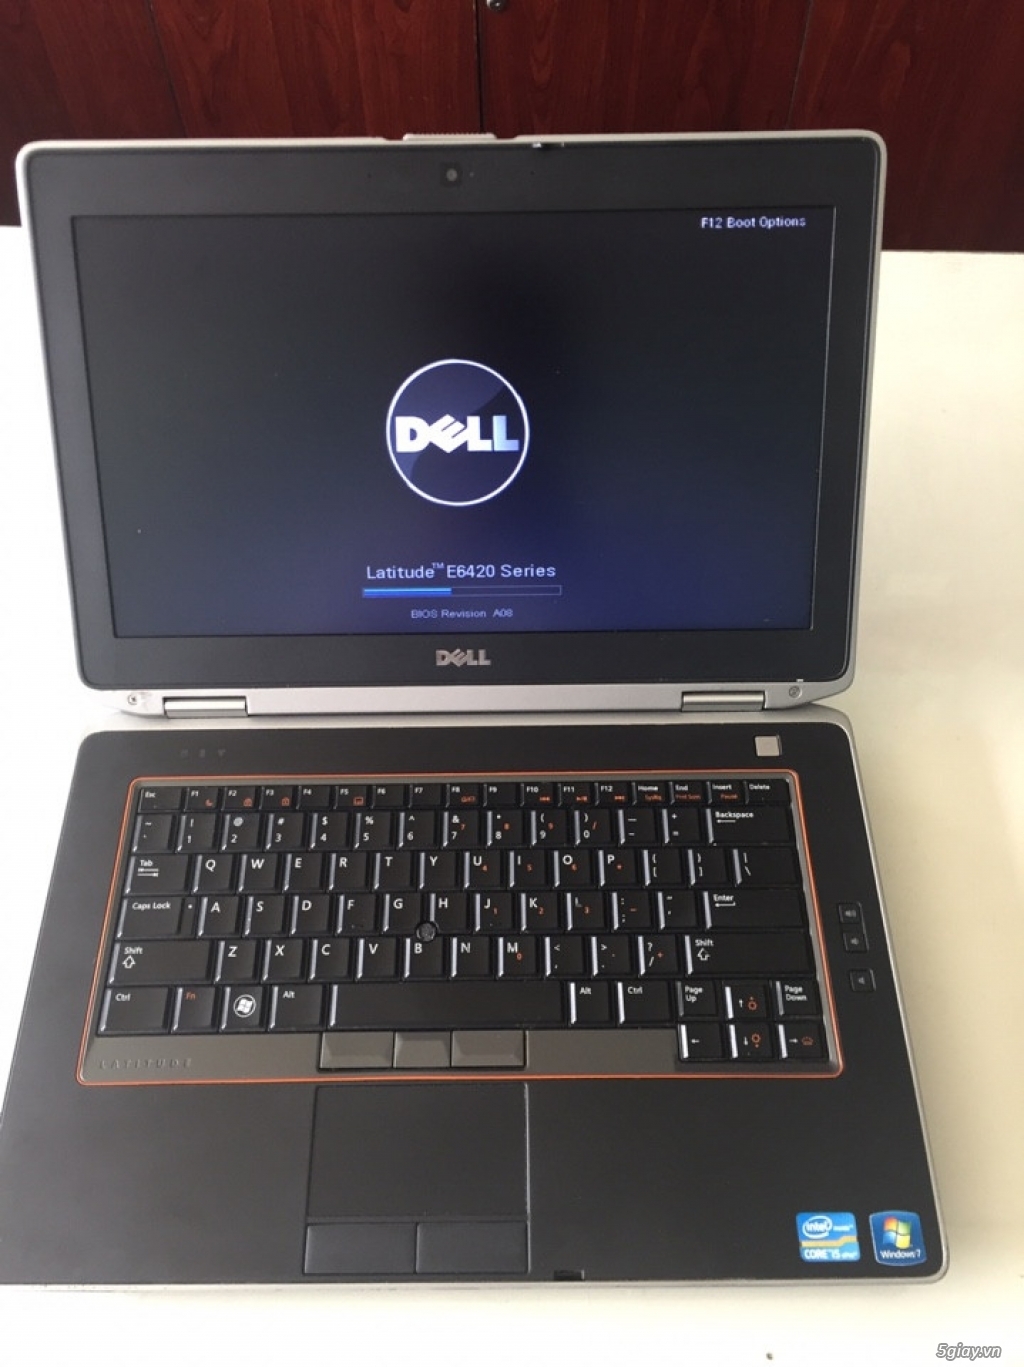 Dell 6420 i5 Ram 4gb Hdd 250 gia re lam a - 4